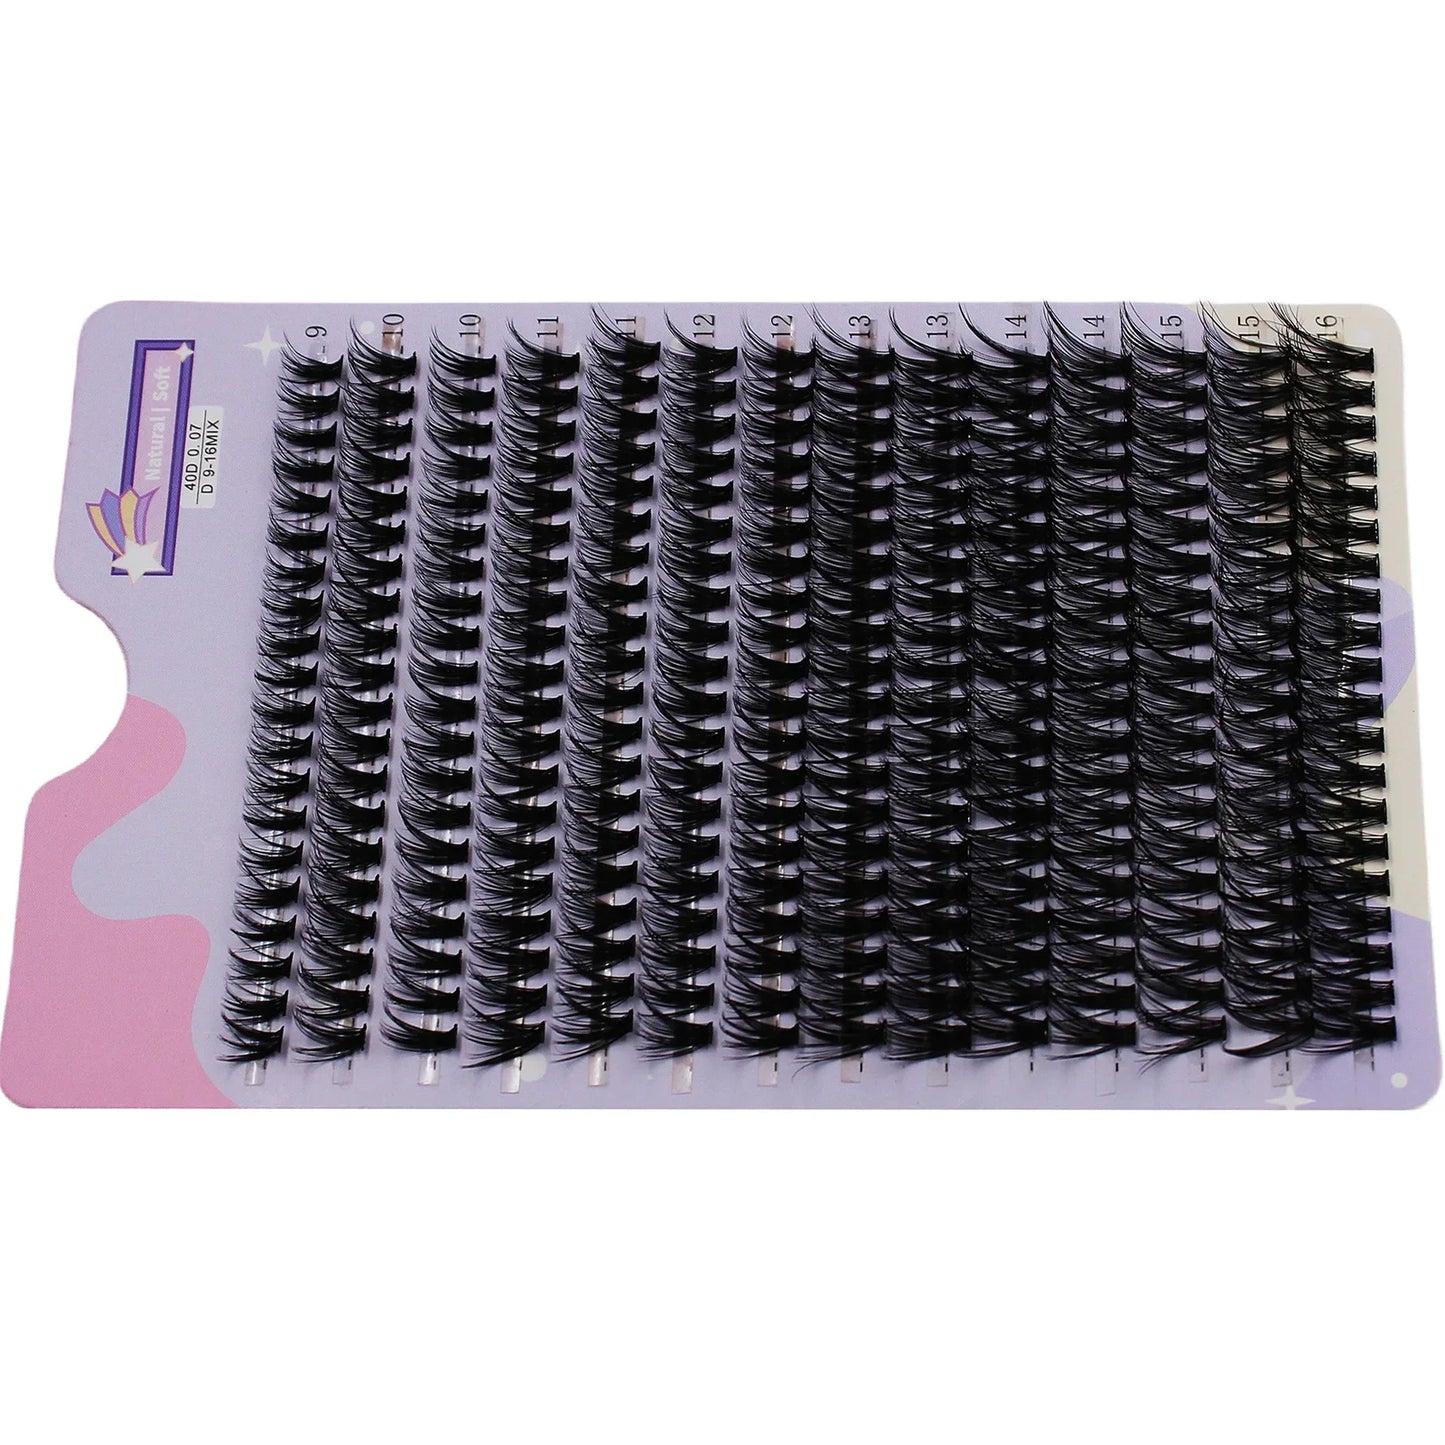 14 Rows 280 Clusters 40D Mix 9-16mm Cluster Lashes Extension Natural